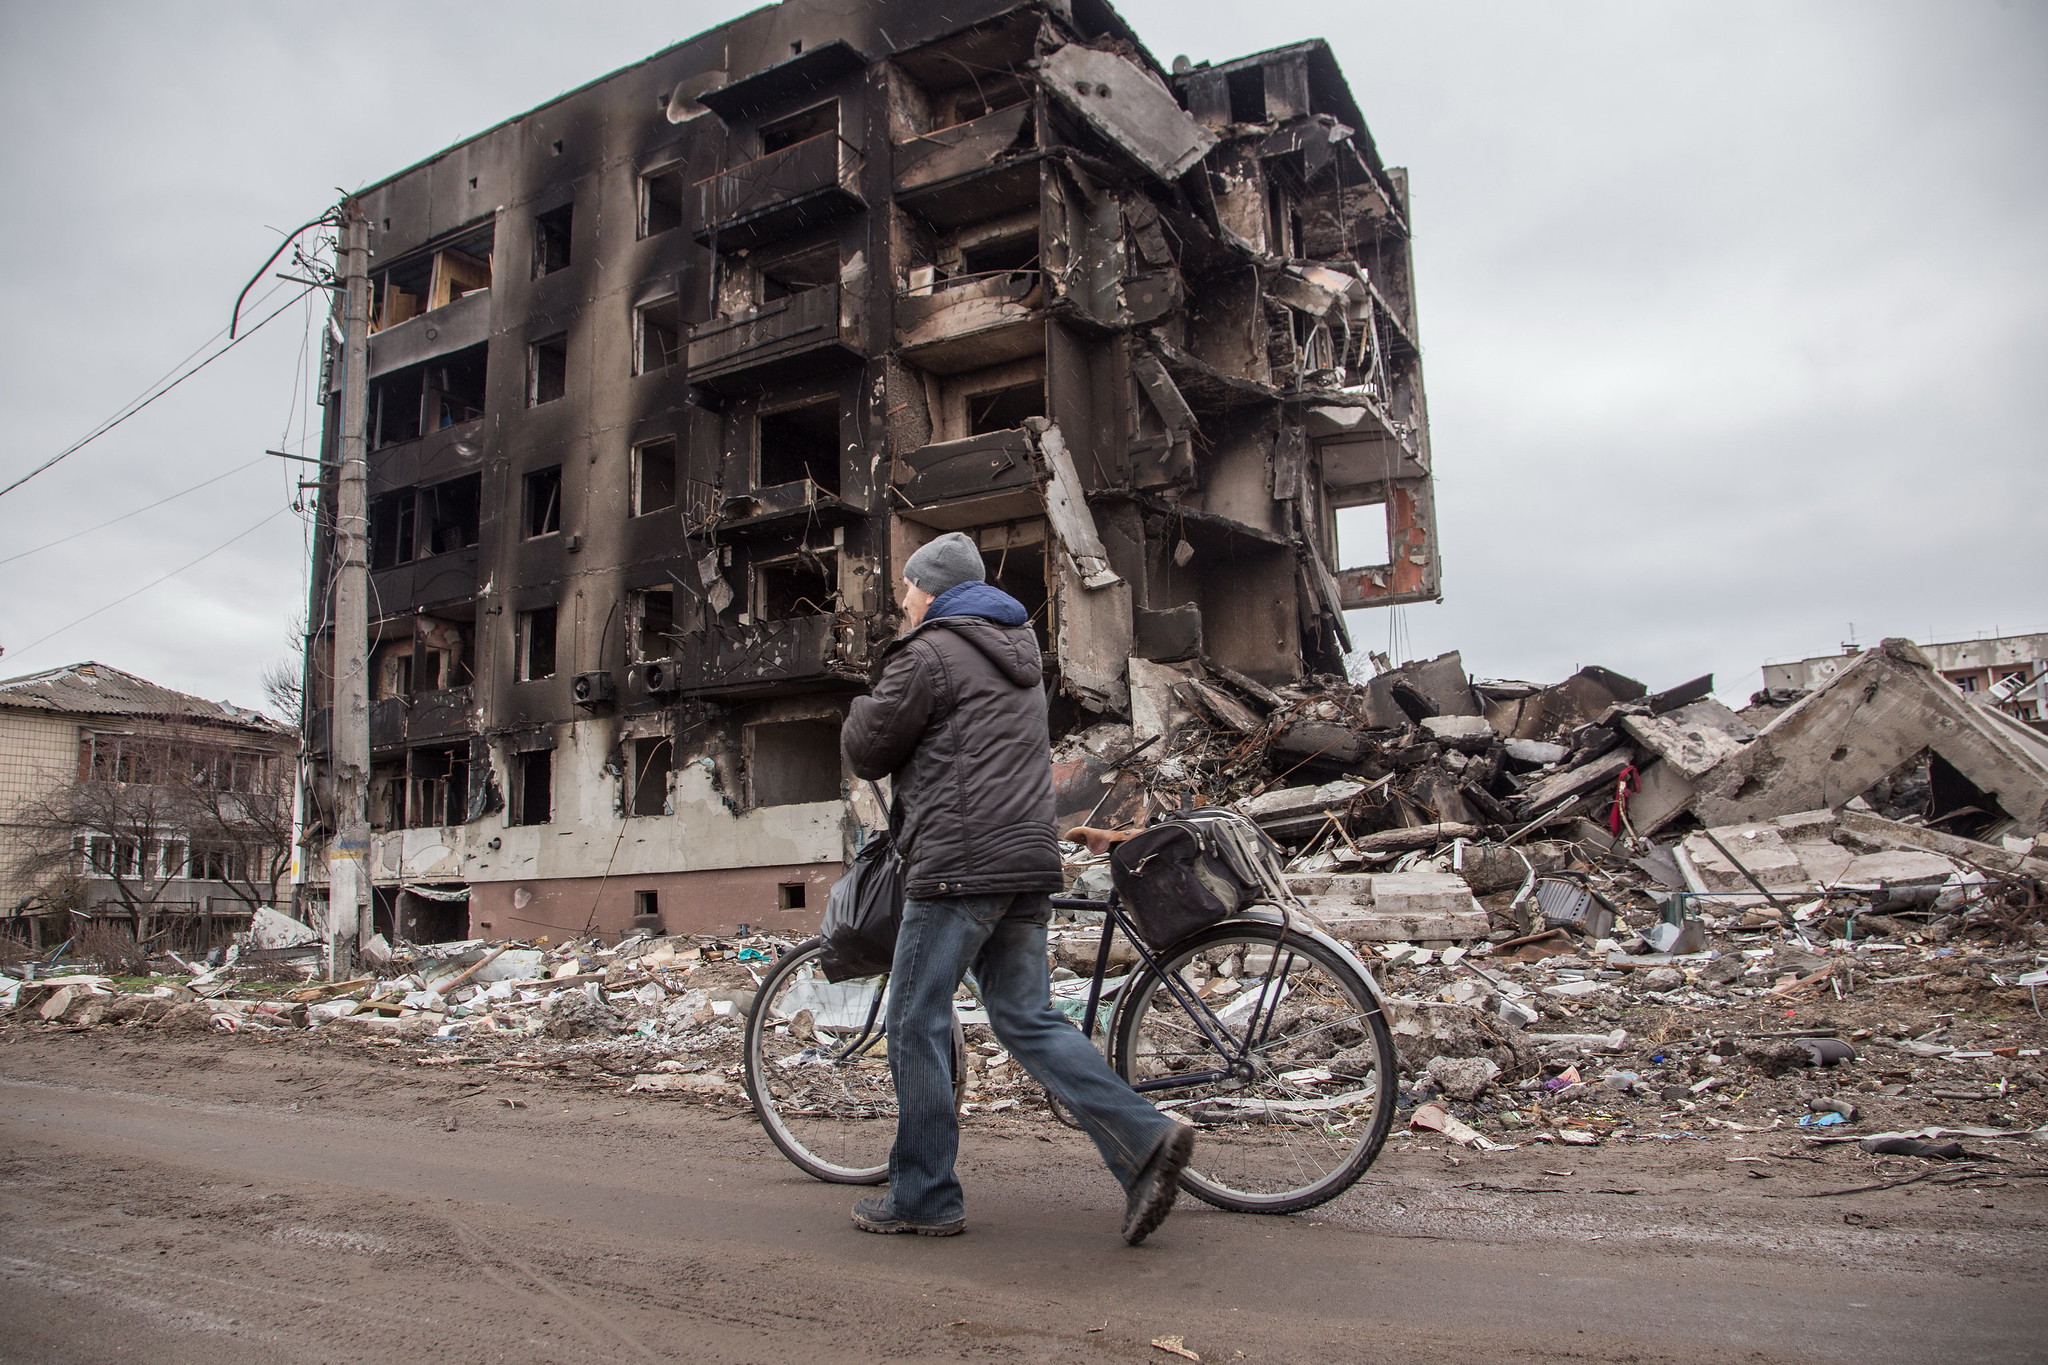 A man pushes a bike past a destroyed building.